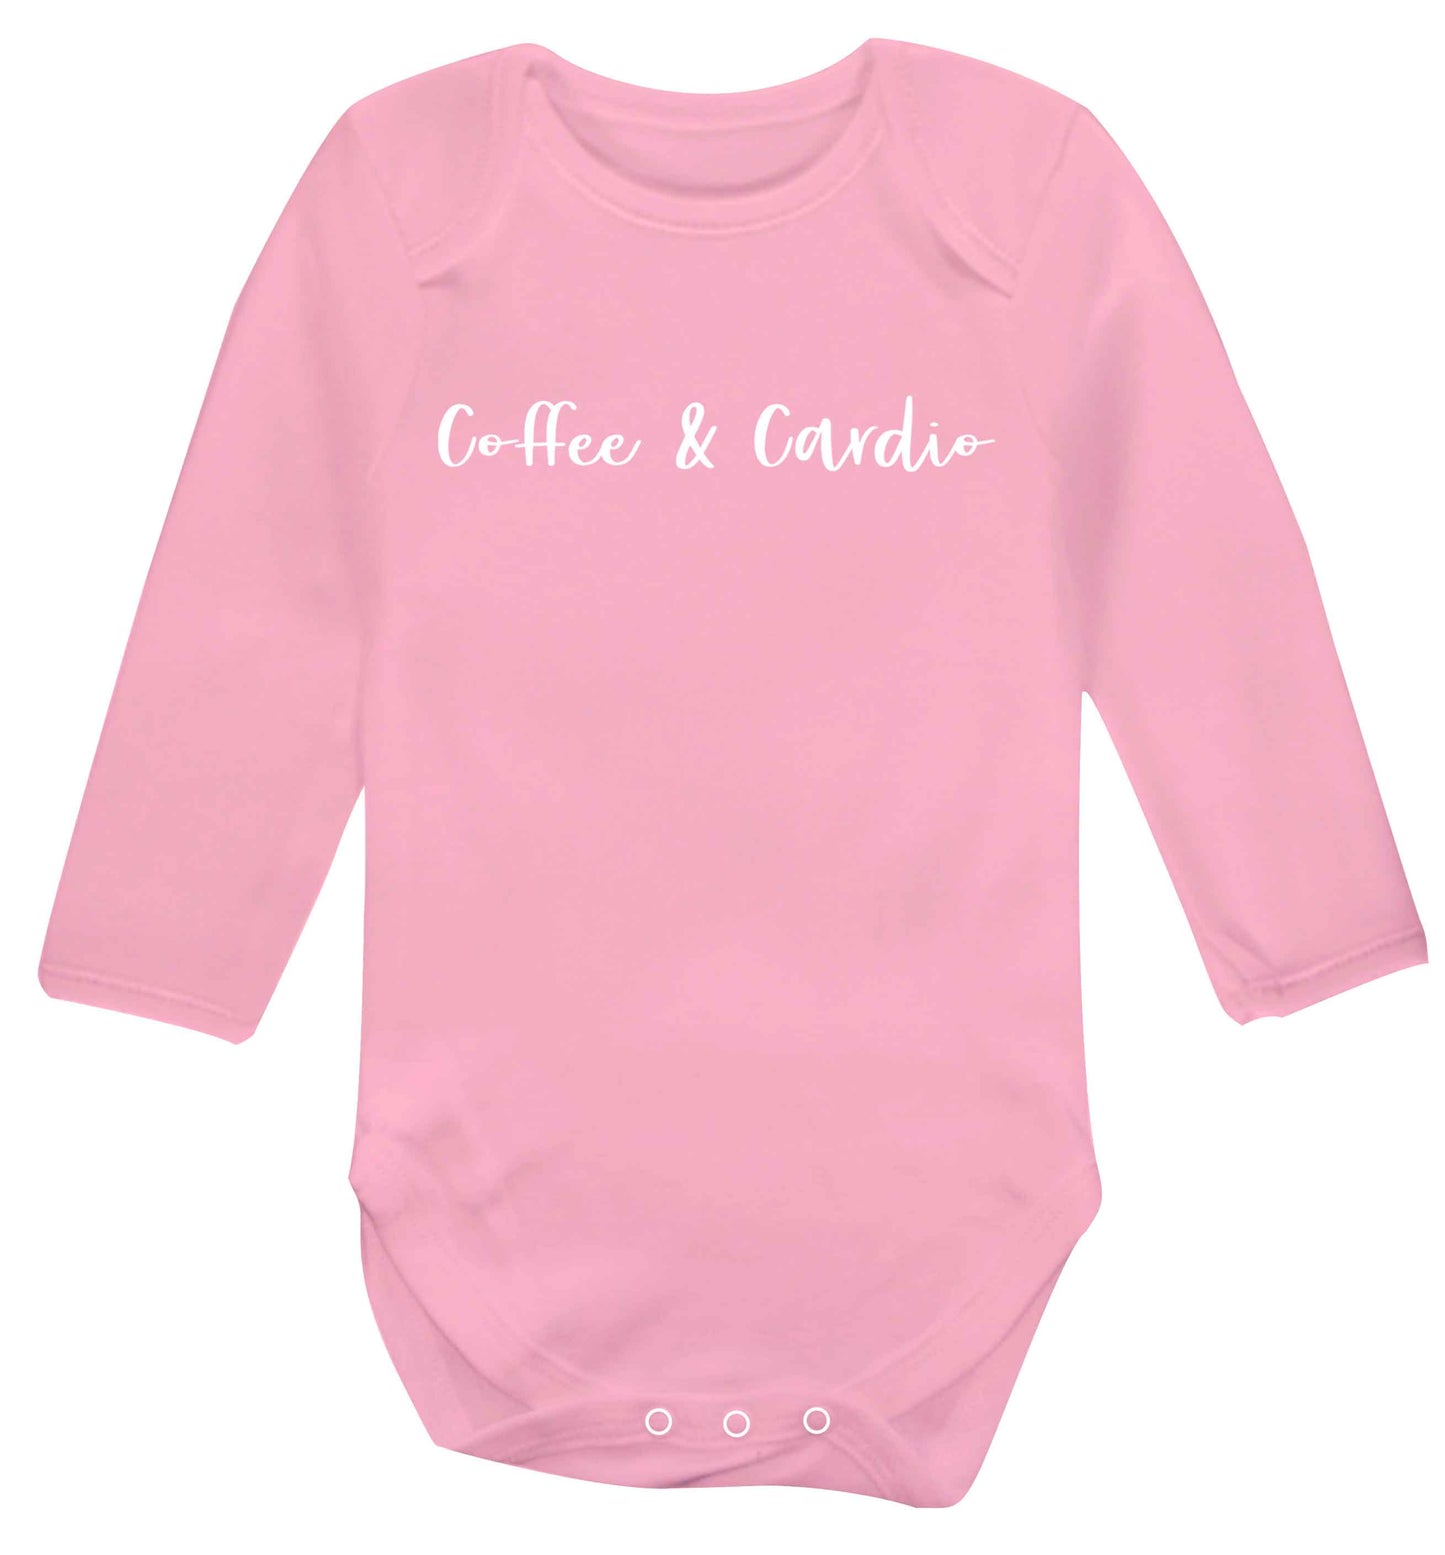 Coffee and cardio Baby Vest long sleeved pale pink 6-12 months